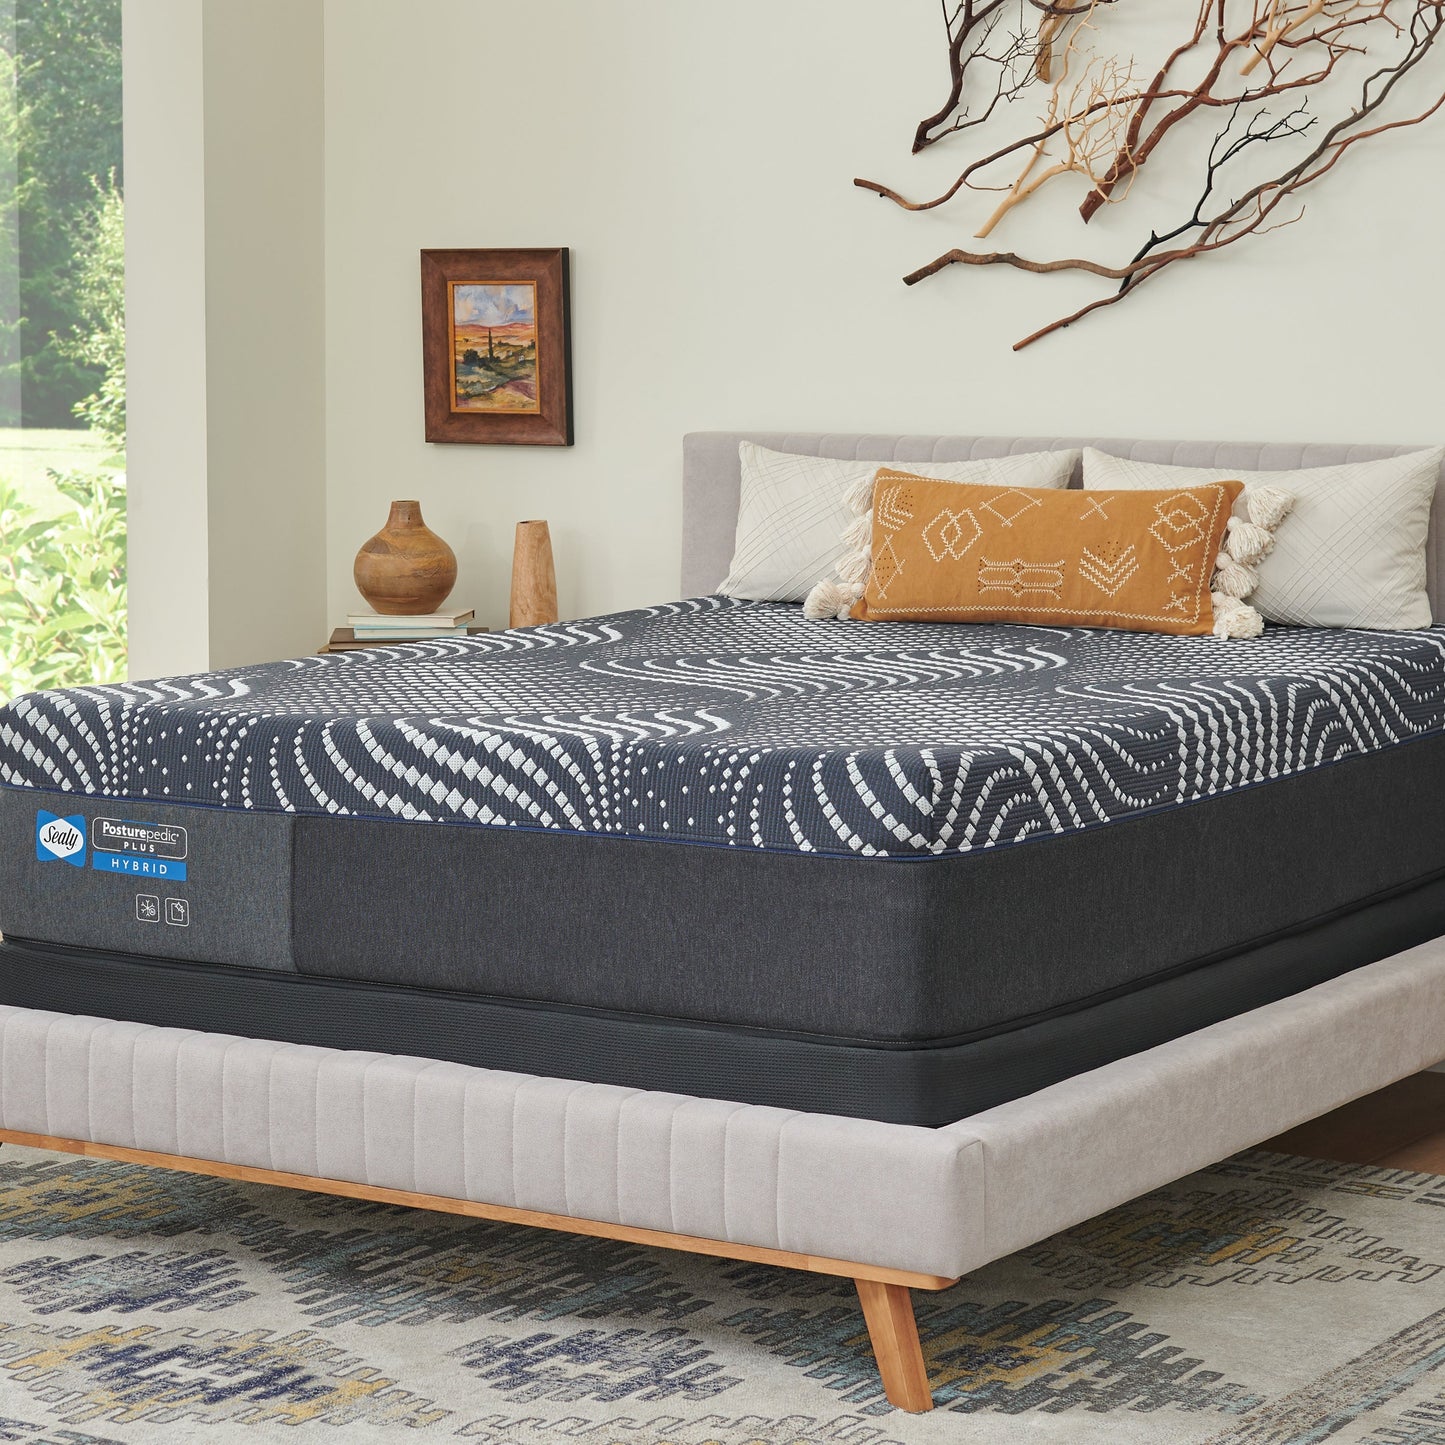 Sealy High Point Firm Mattress On Bed Frame In Bedroom